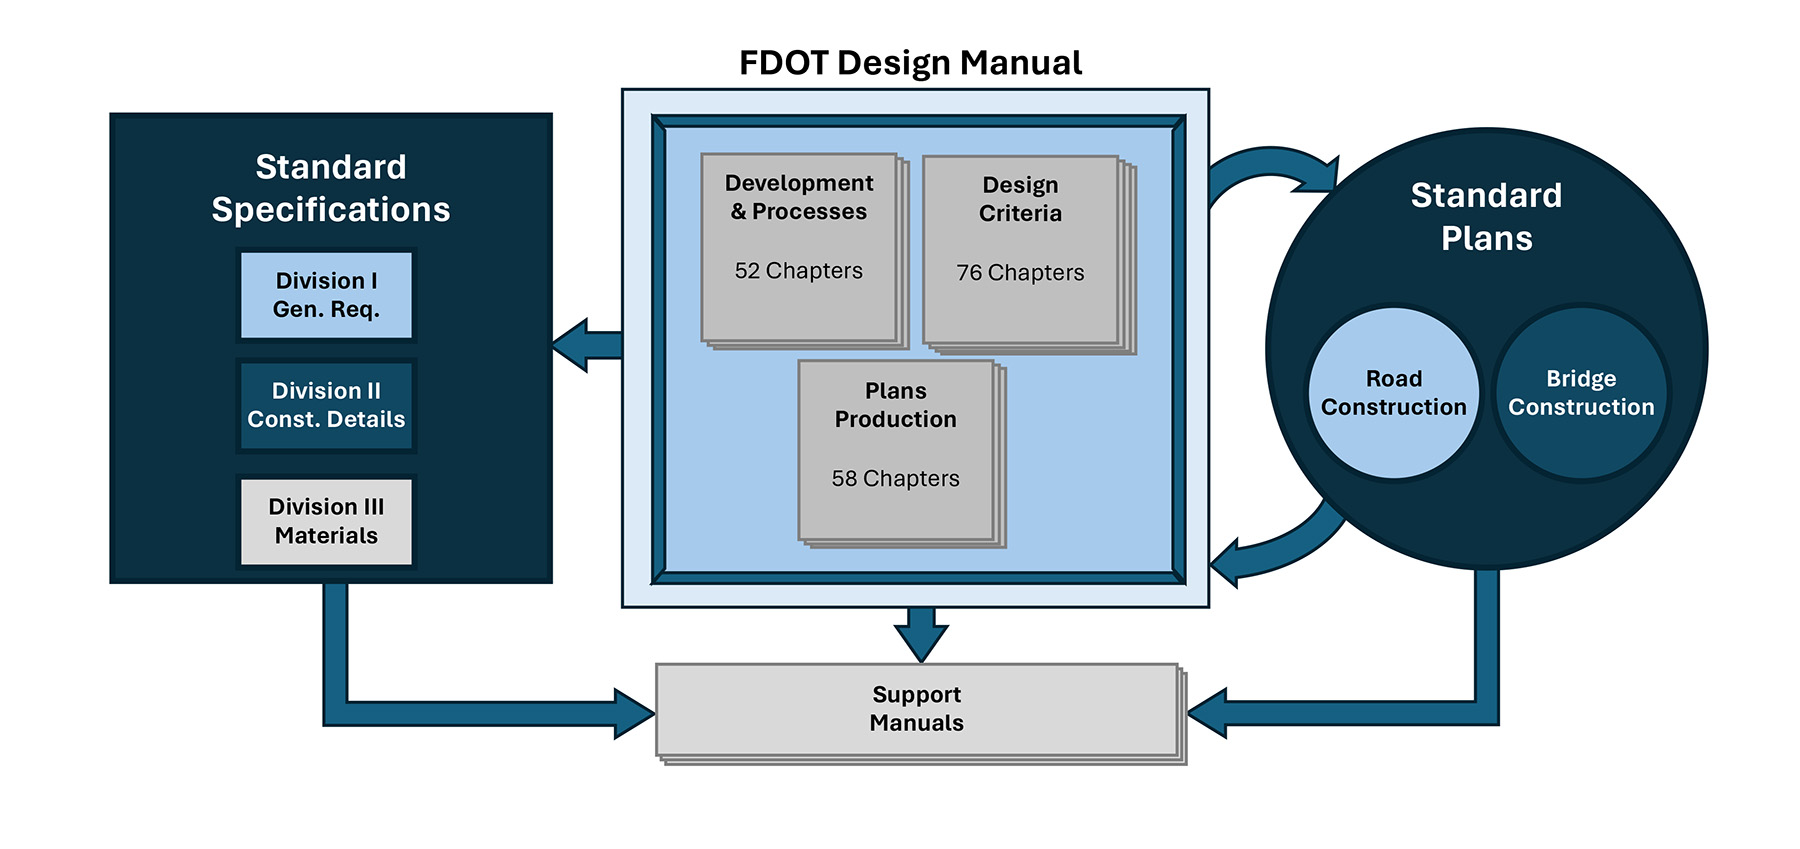 Image shows a cross-referencing diagram that includes: standard specifications, standard plans, support manuals, and the Florida Design Manual. 